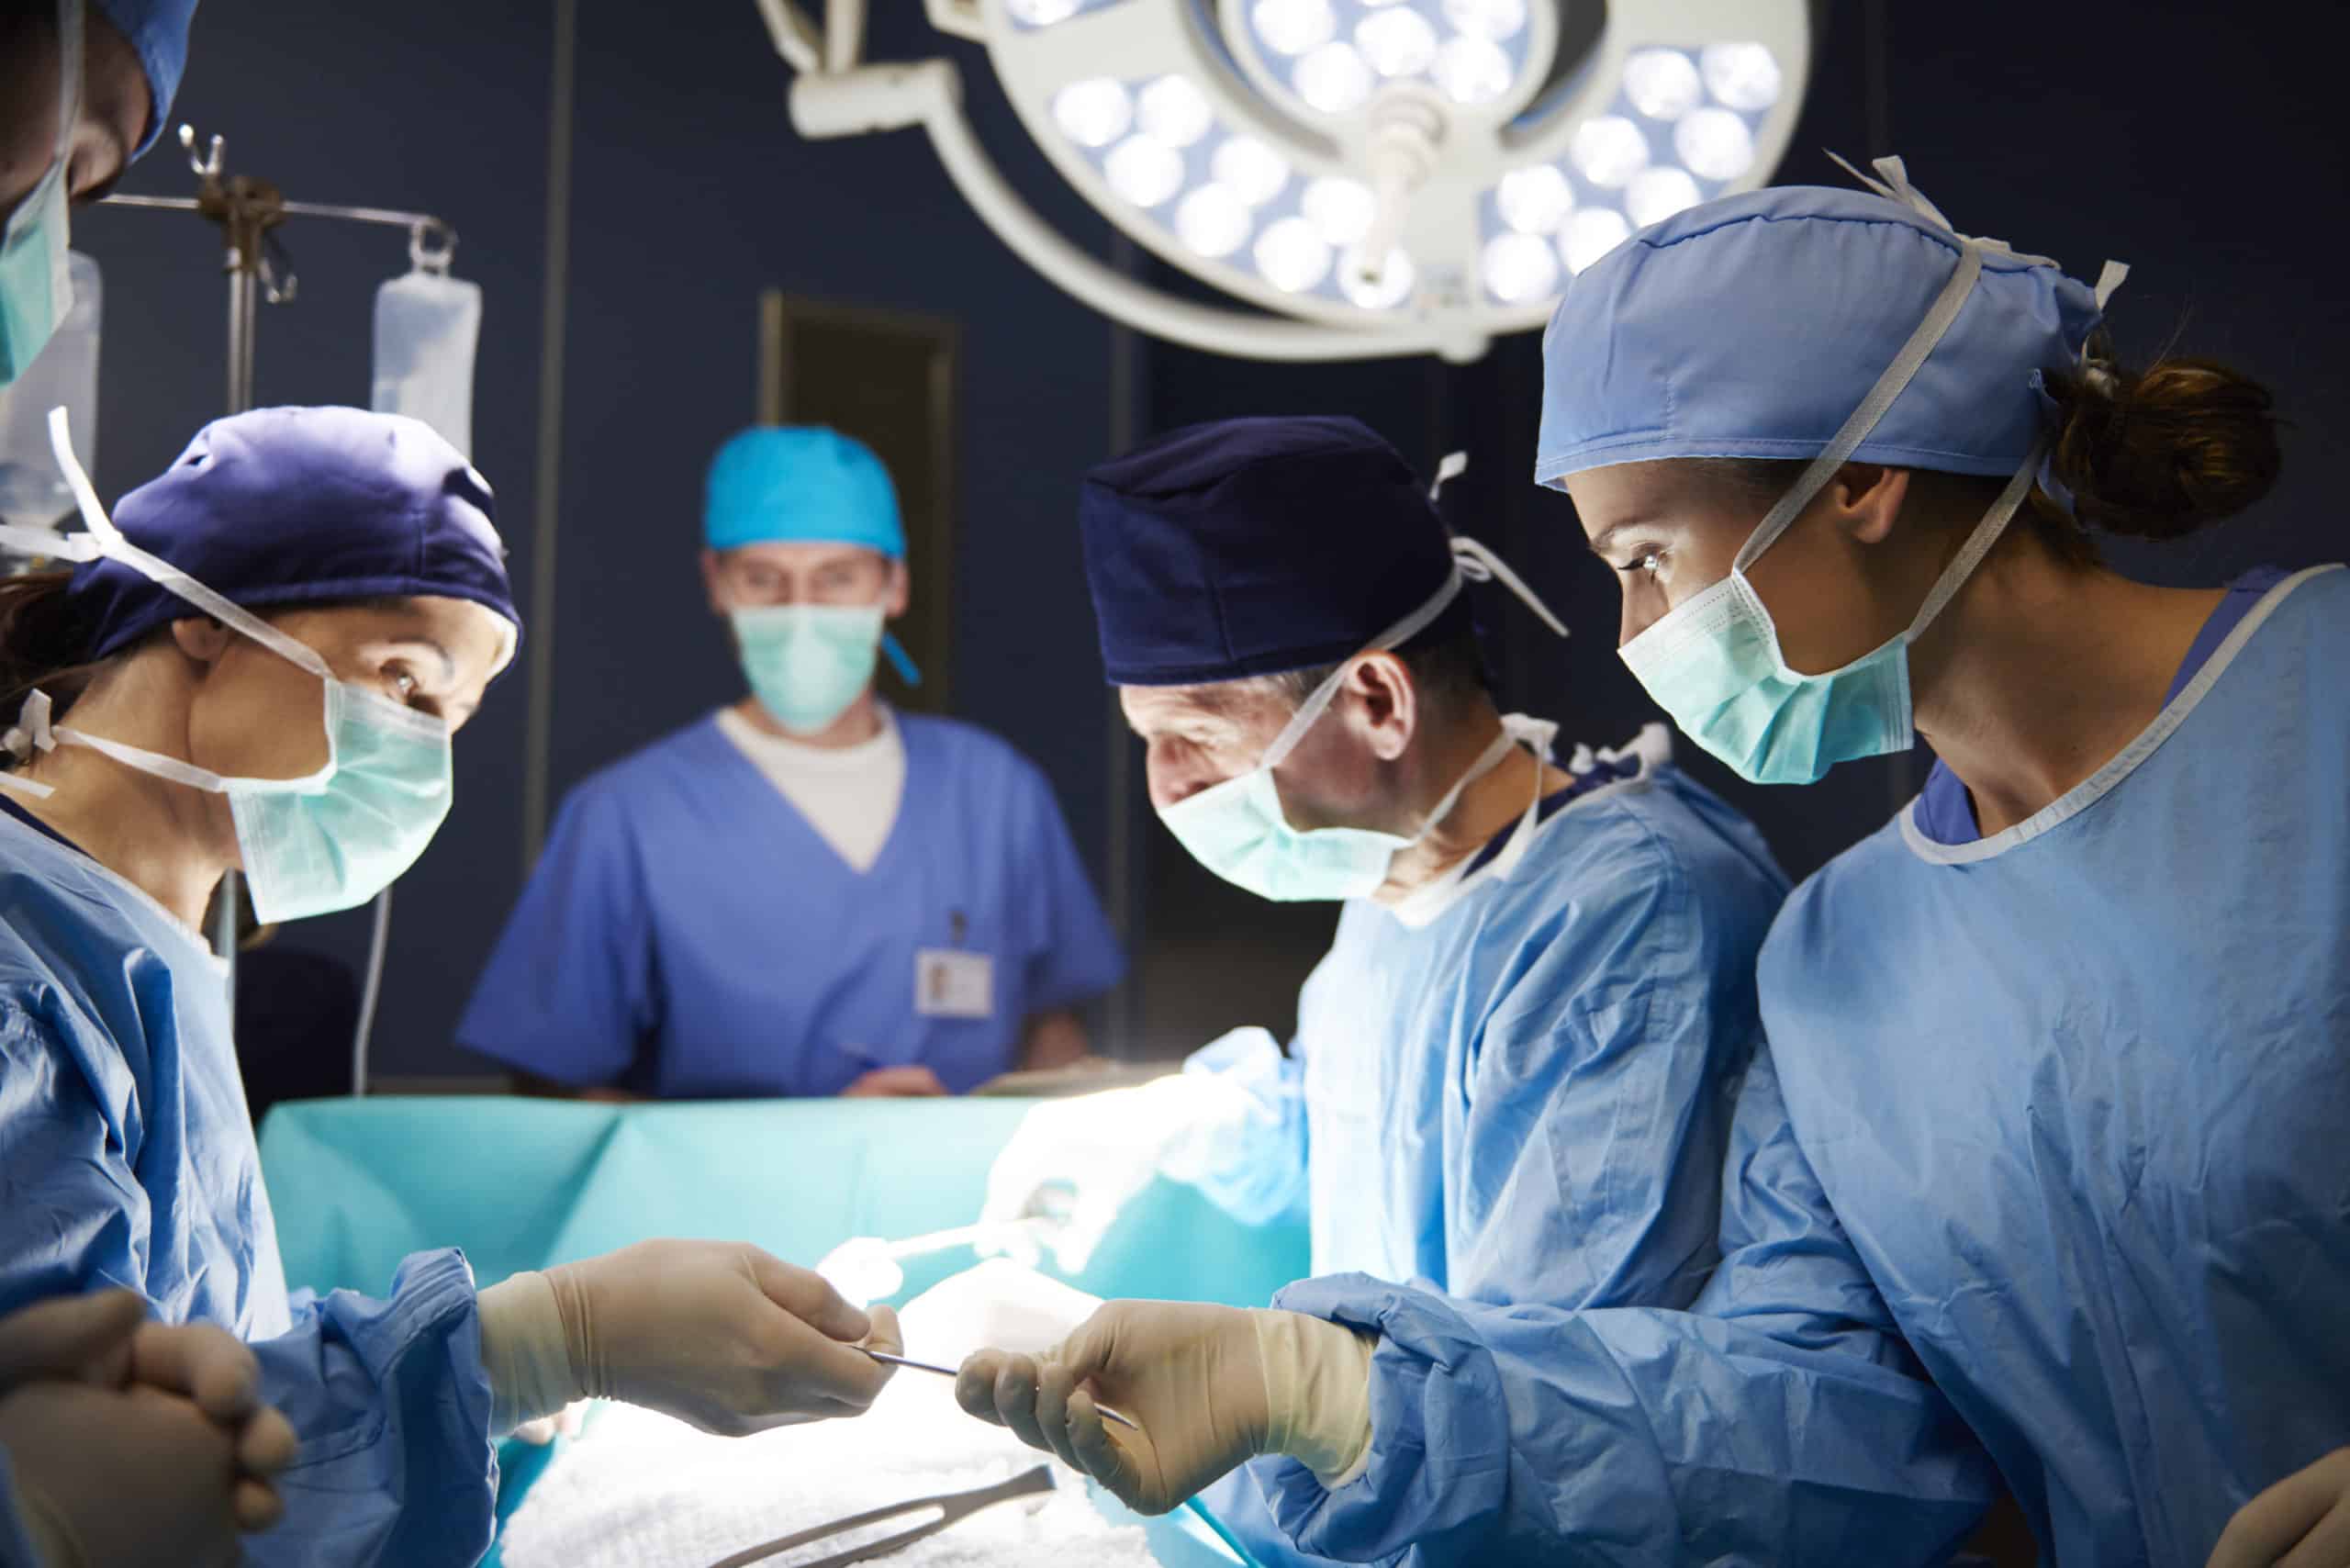 Surgery - Operating theater